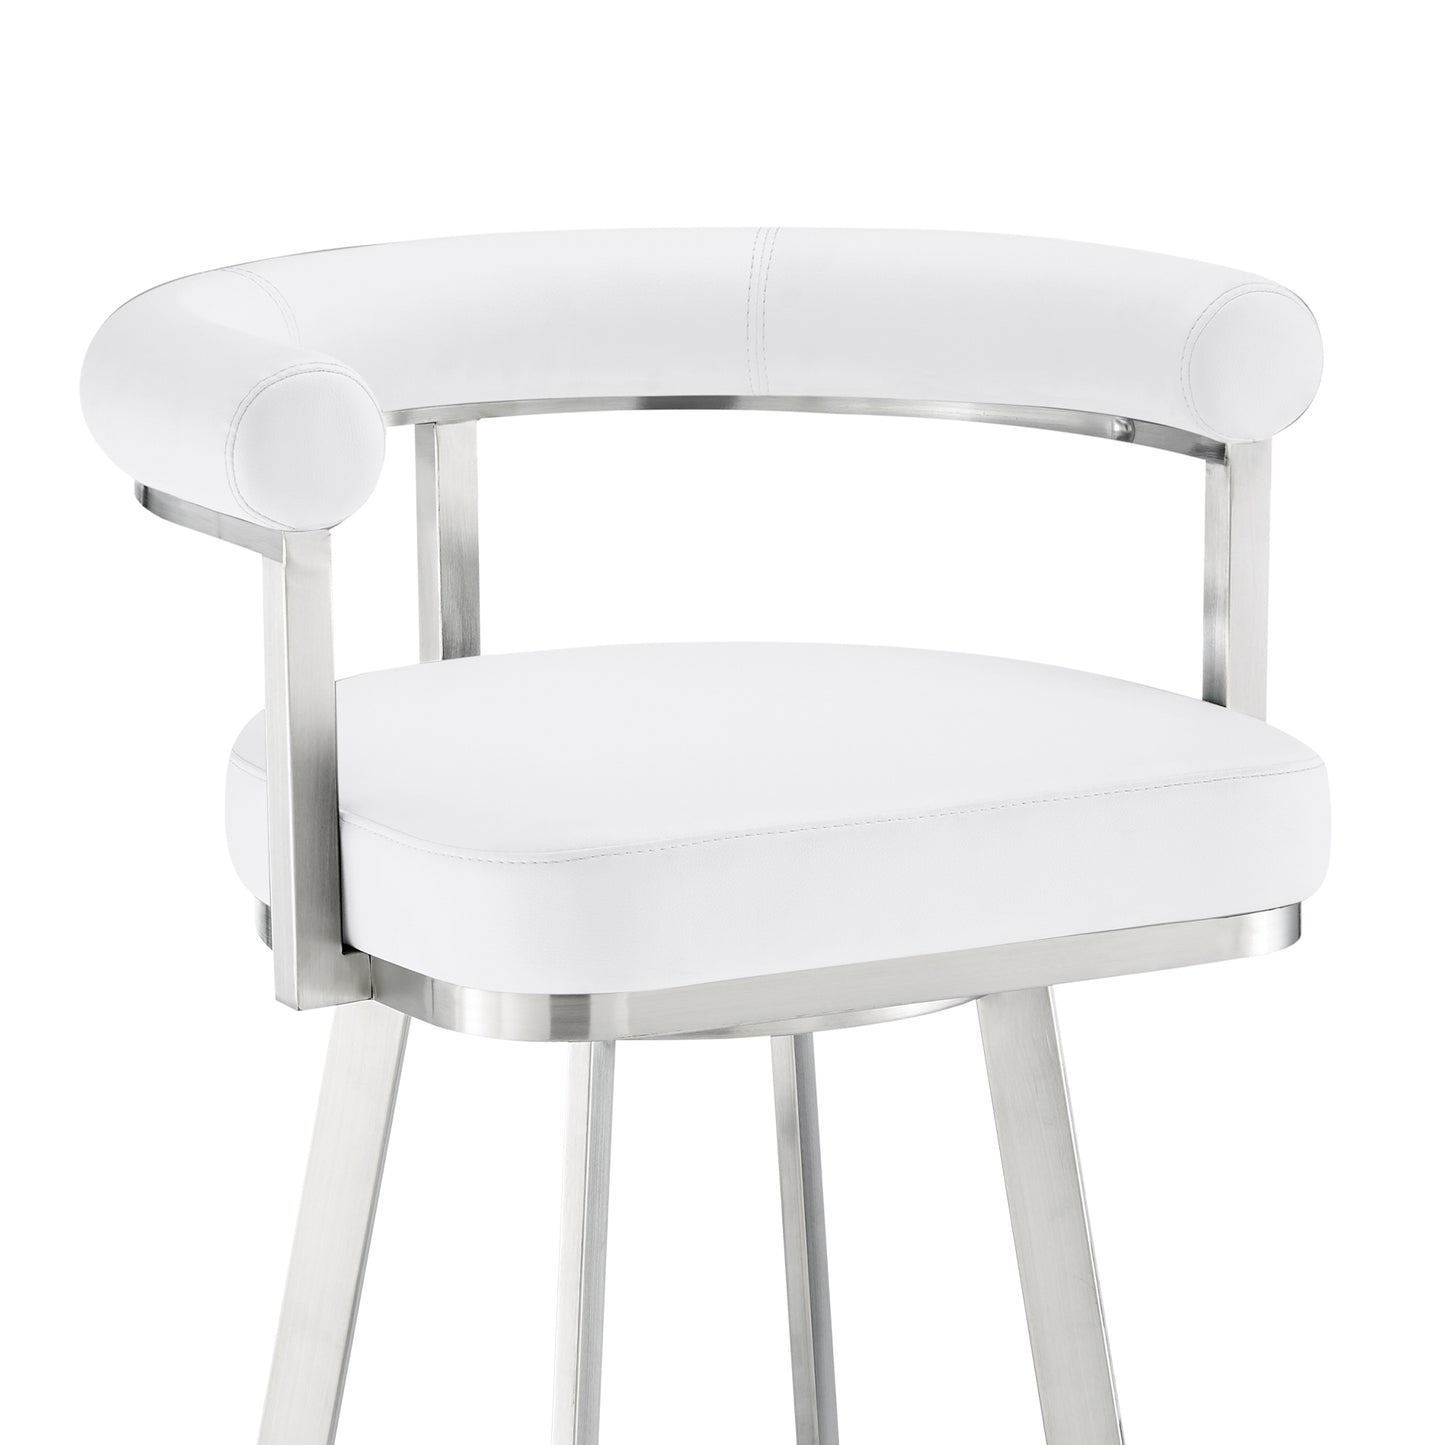 Magnolia 30" Swivel Bar Stool in Brushed Stainless Steel with White Faux Leather